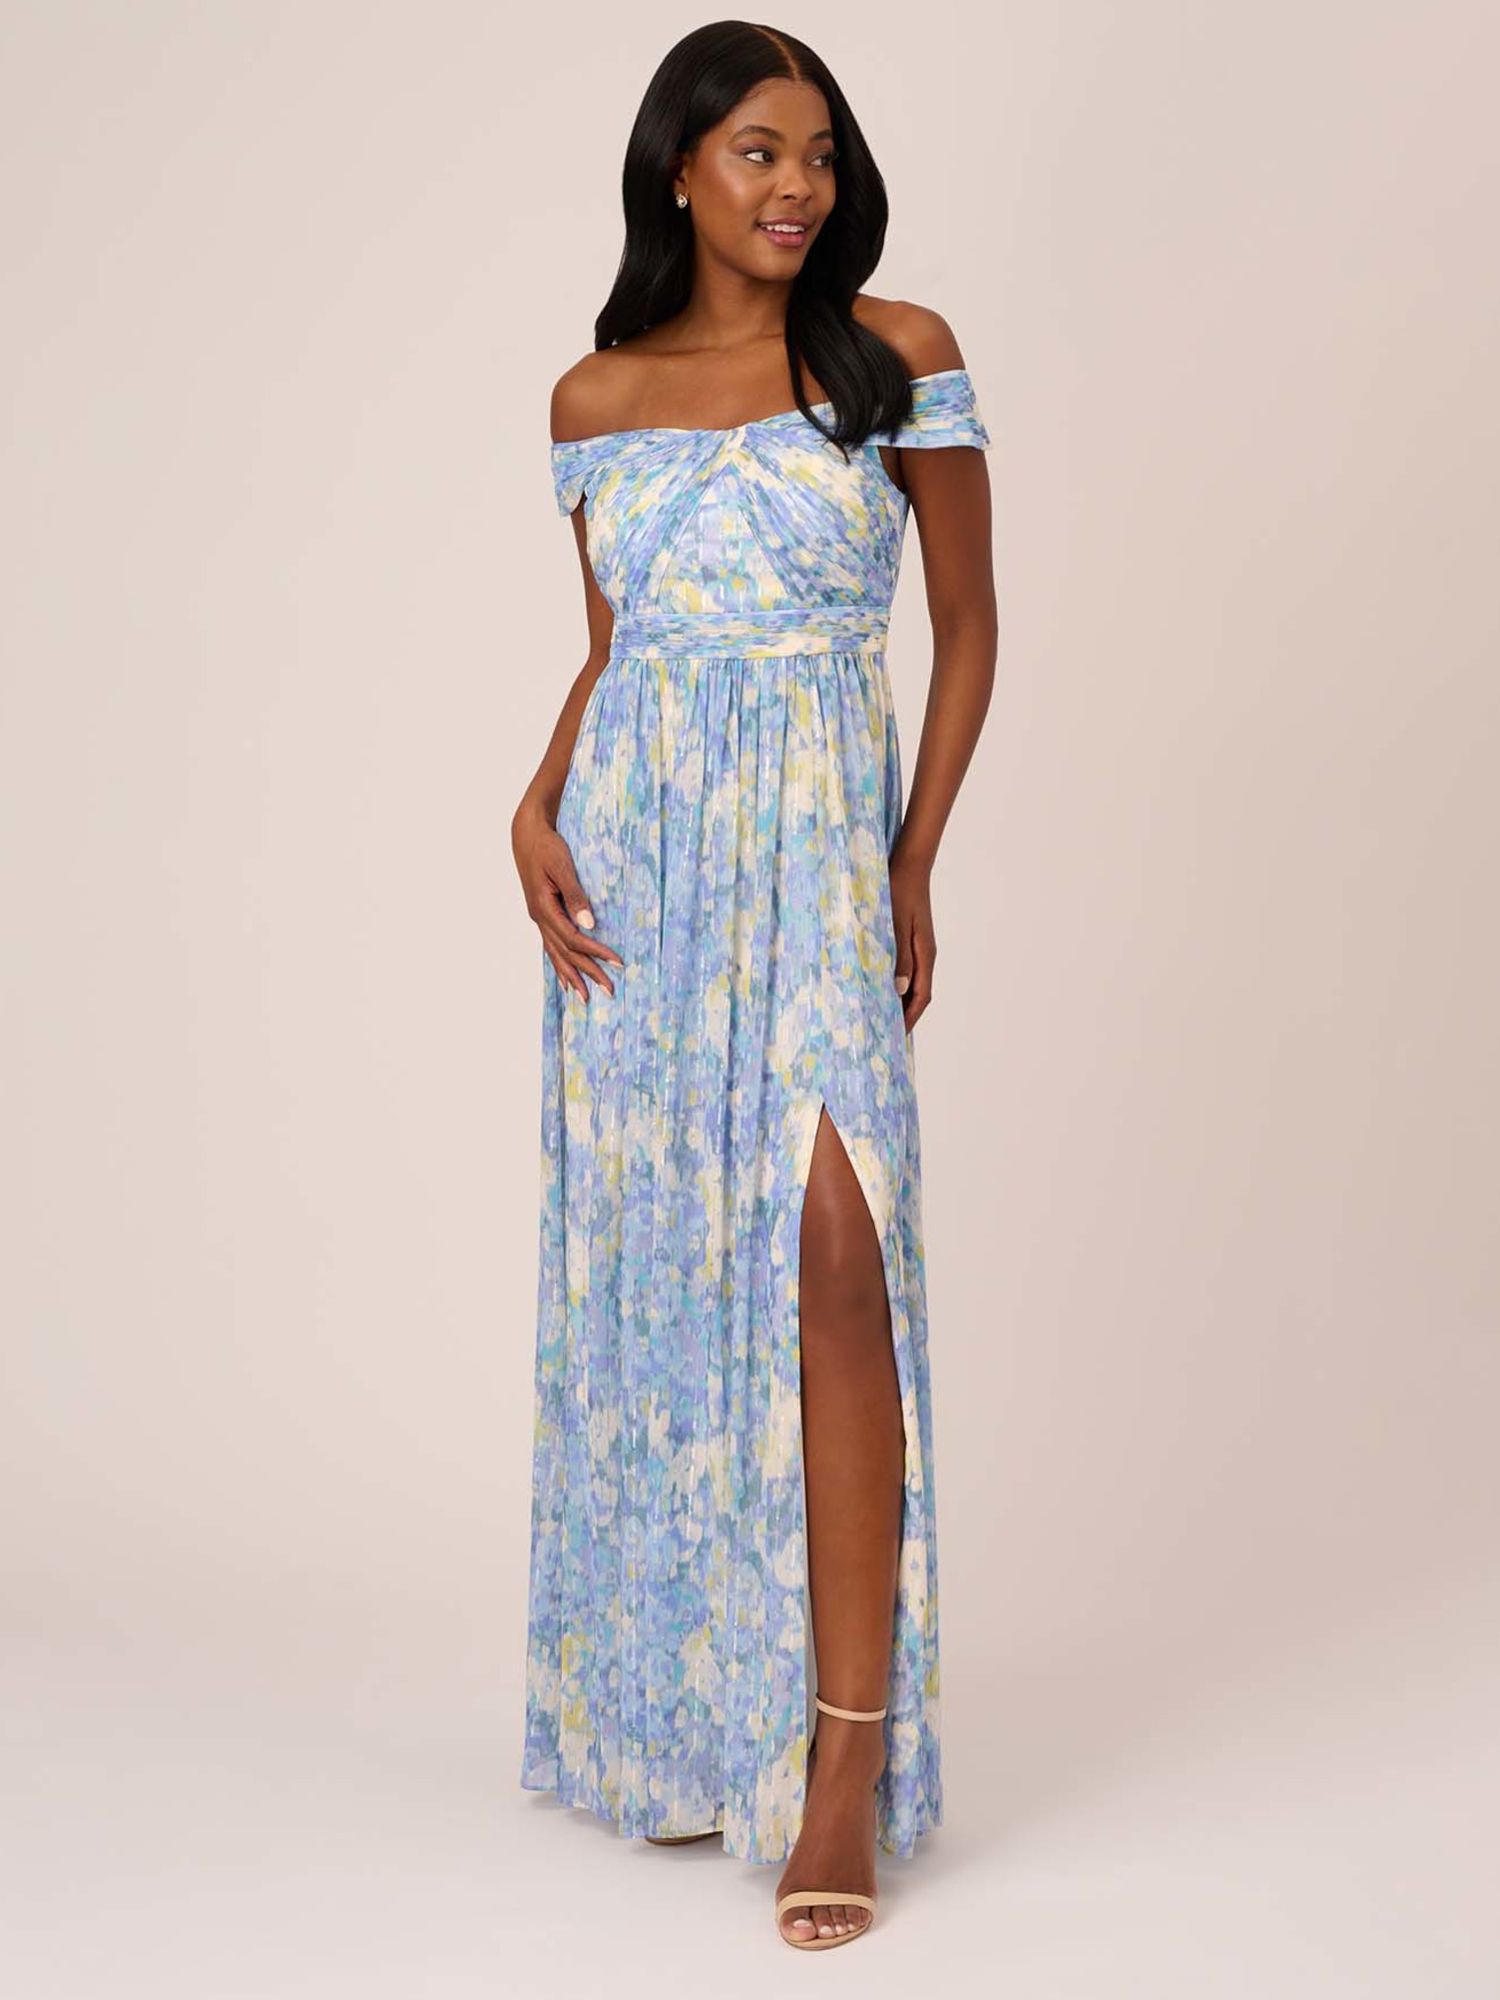 Adrianna Papell Watercolour Floral Off The Shoulder Maxi Dress, Blue/Multi,  6